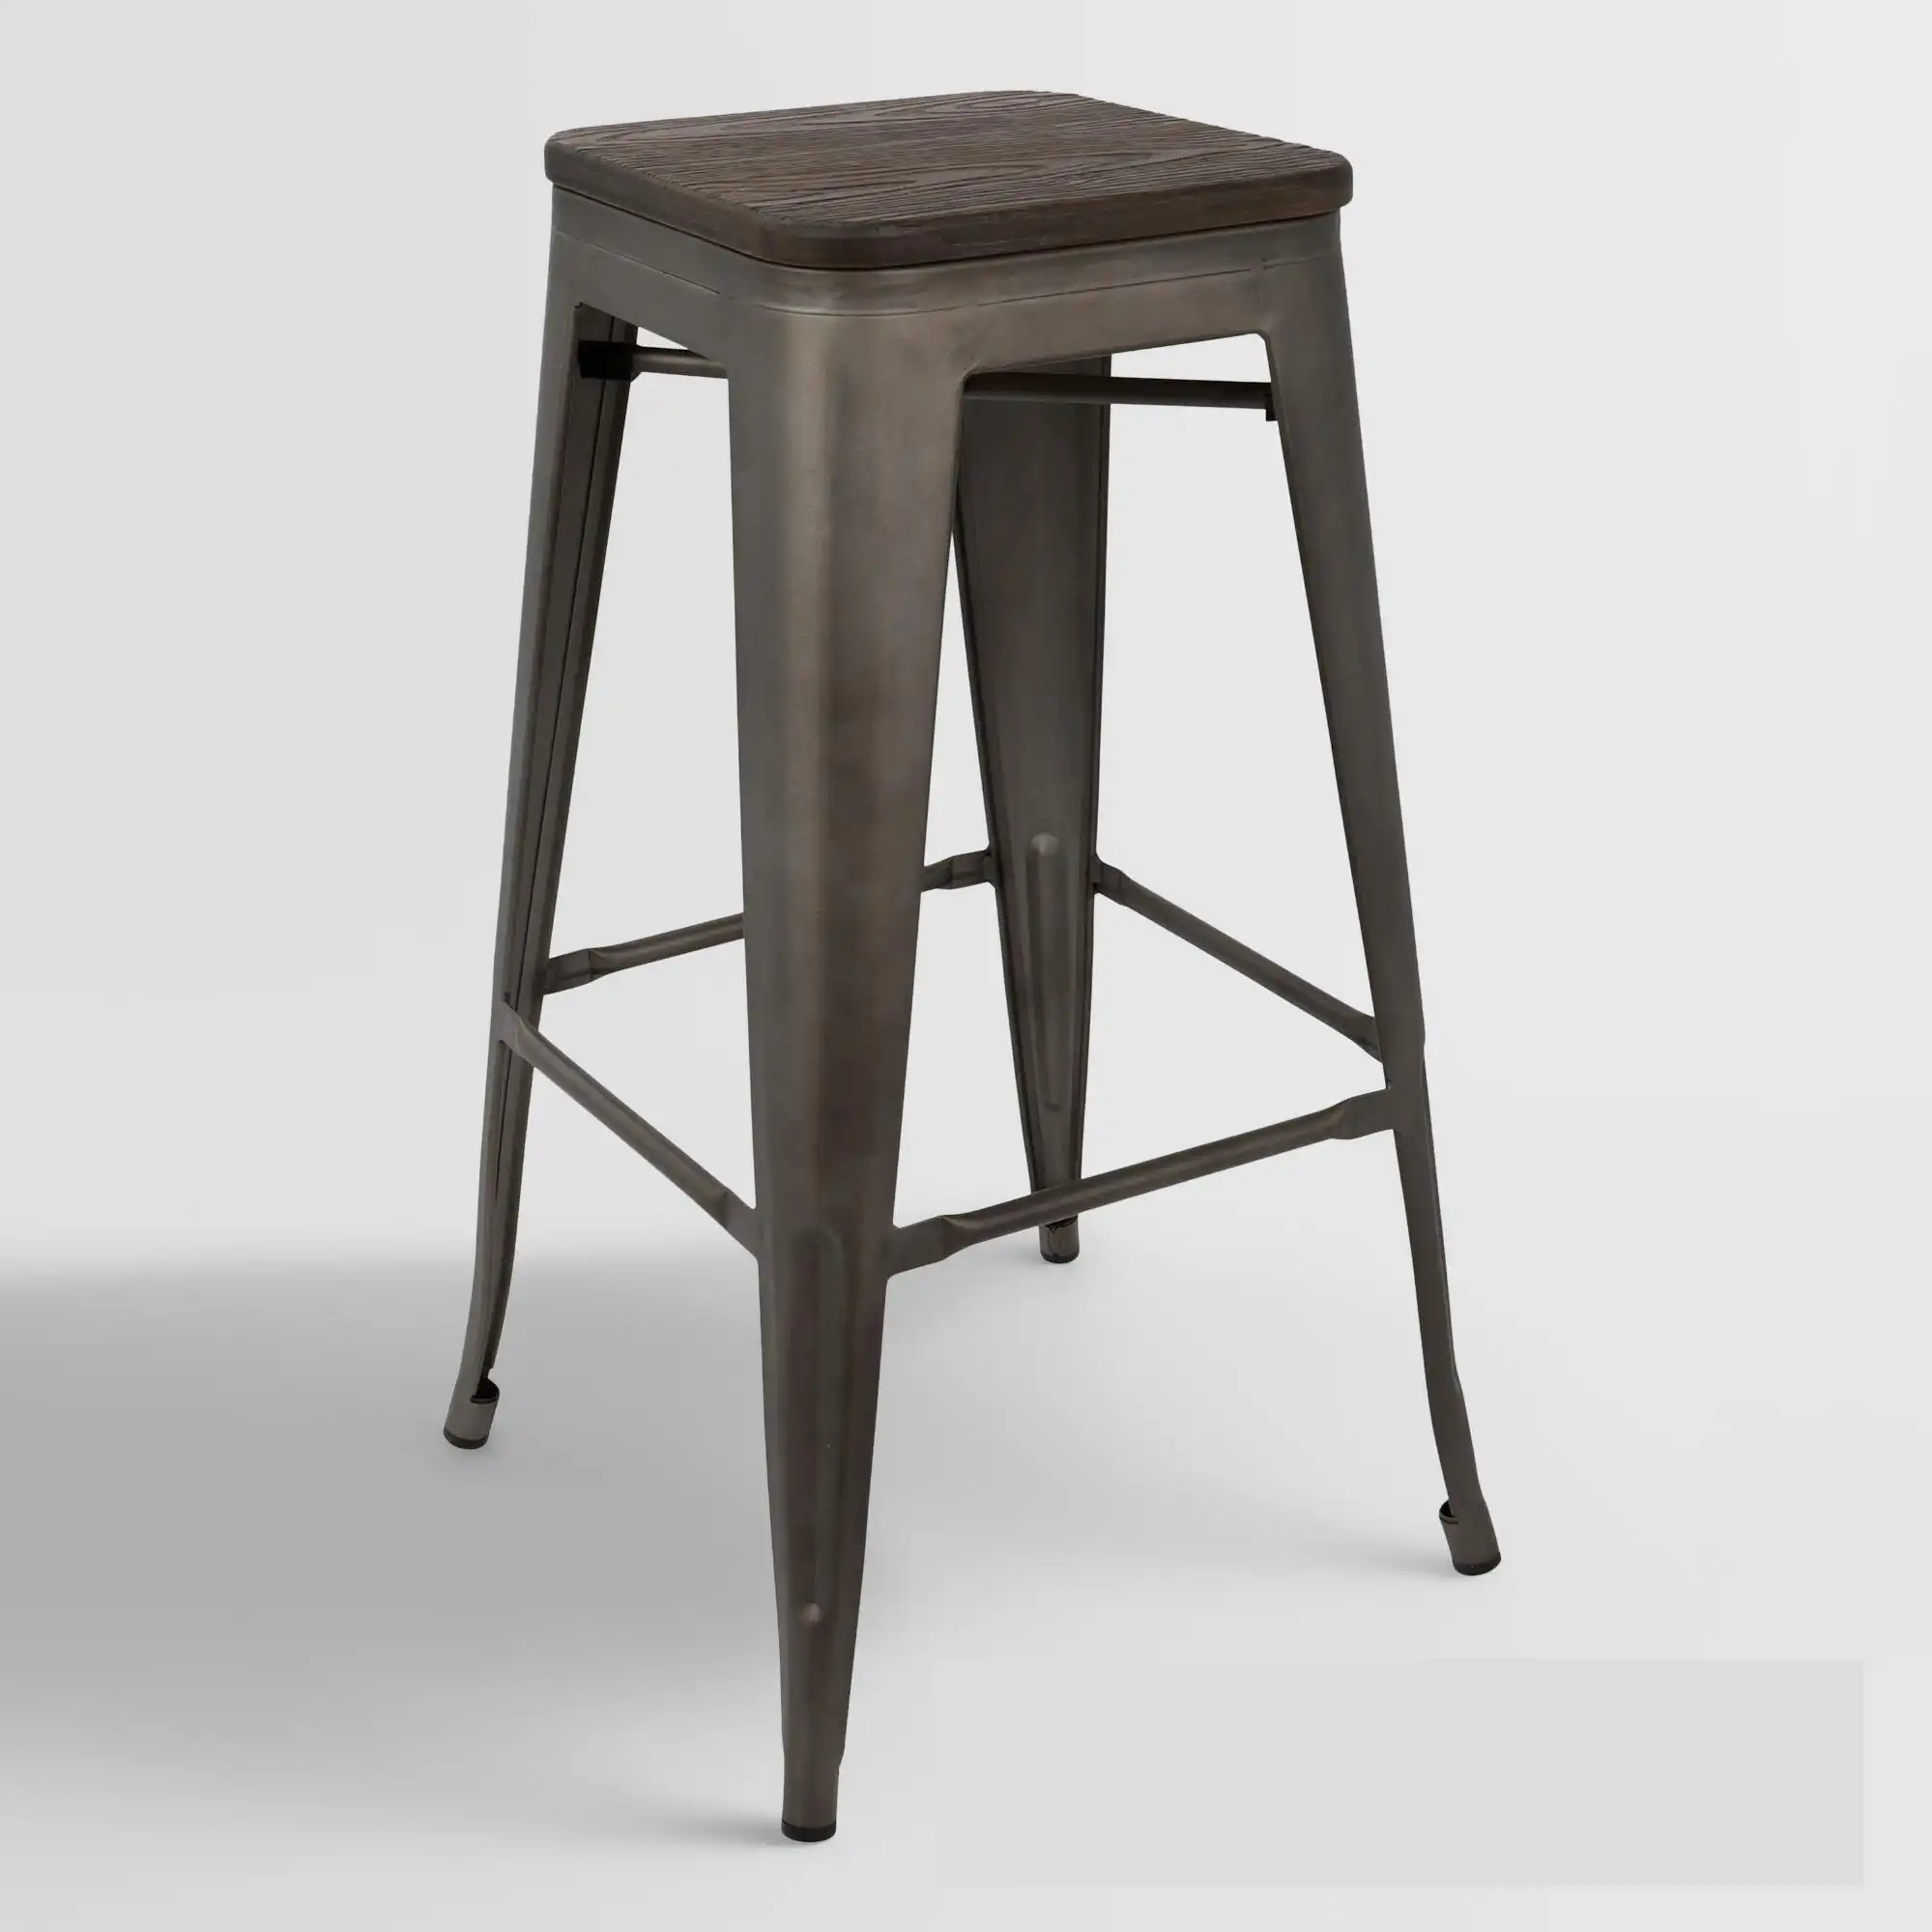 Industrial Iron Cello Bar Stool with Wooden Seat - popular handicrafts